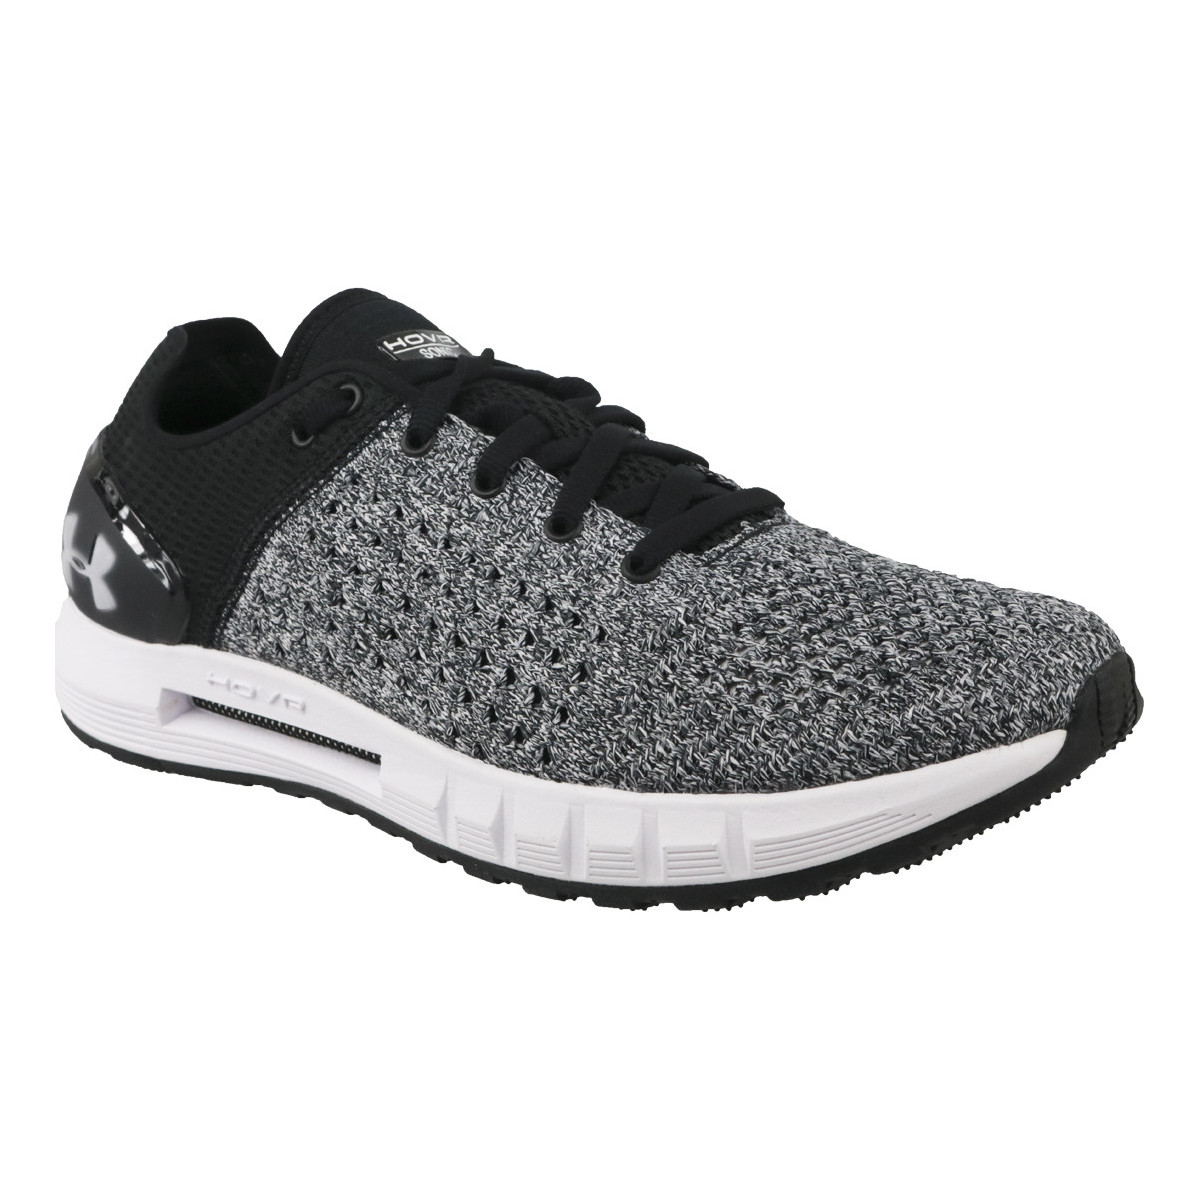 Zapatos Mujer Running / trail Under Armour W Hovr Sonic NC Gris